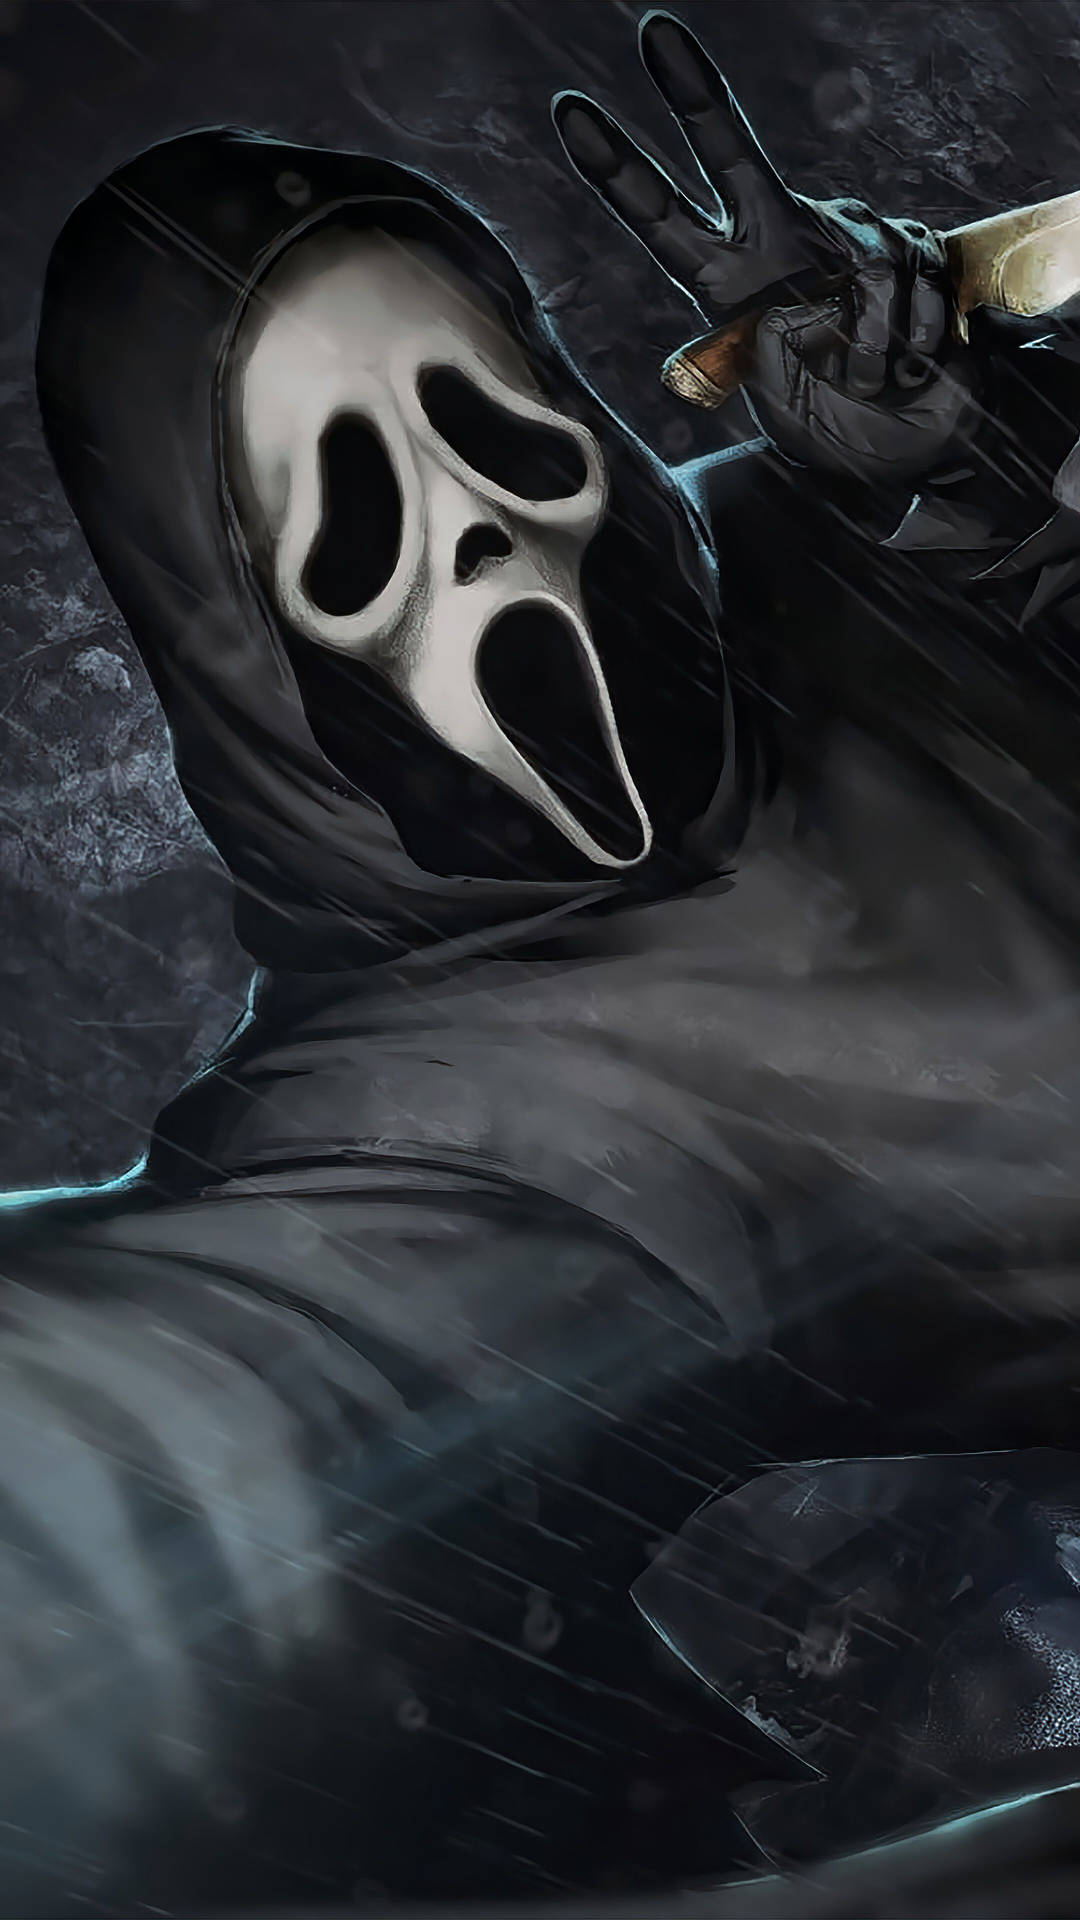 Artistic Digital Painting of Ghostface from Scream Wallpaper